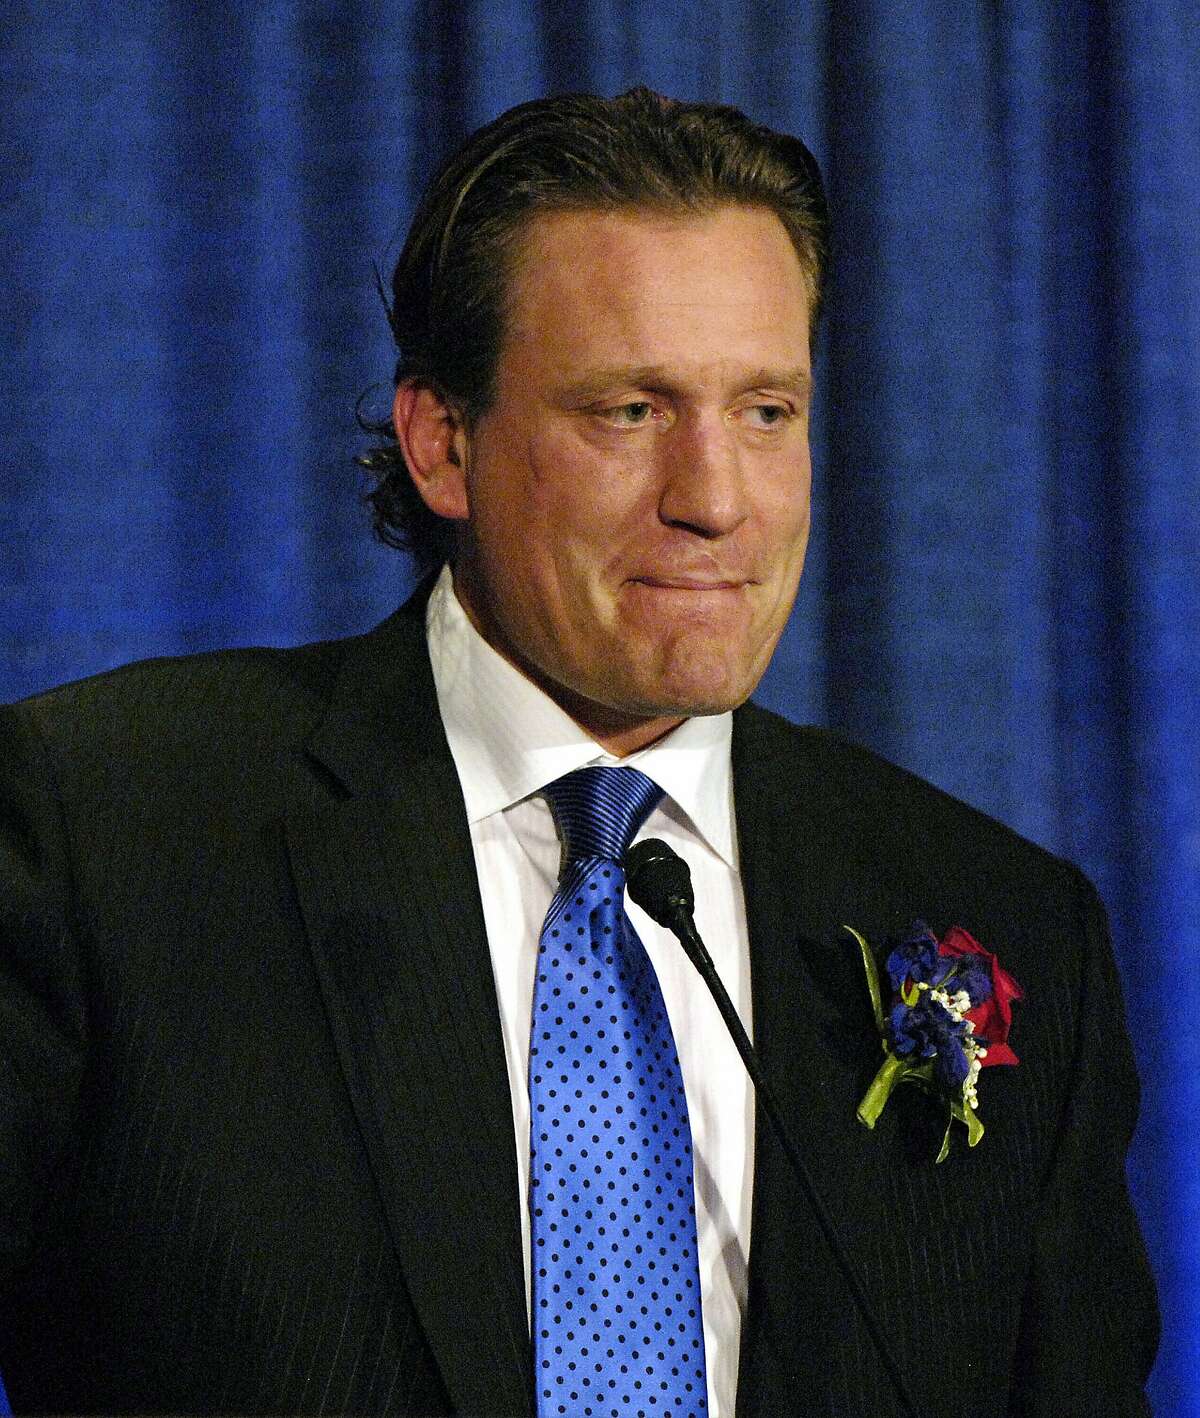 File- This Oct. 21, 2010, file photo shows Jeremy Roenick speaking during induction ceremonies for the U.S. Hockey Hall of Fame in Buffalo, N.Y. NBC Sports has suspended former NHL player Jeremy Roenick indefinitely for making inappropriate comments about co-workers. The network announced the suspension Monday, Dec. 23, 2019. (AP Photo/Don Heupel, File)